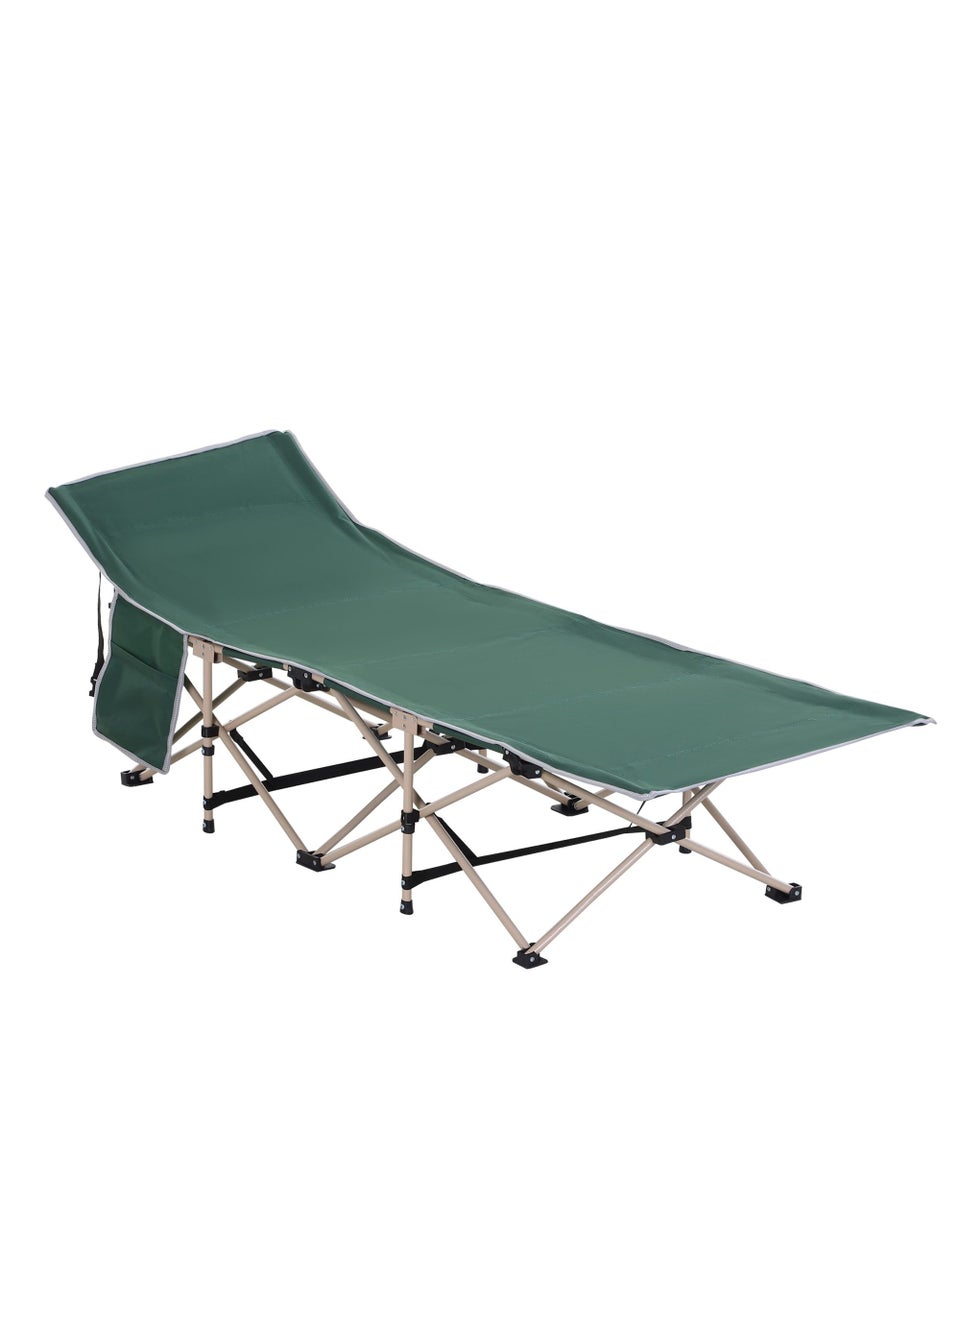 Outsunny Single Foldable Camping Bed (190cm x 68cm x 52cm)